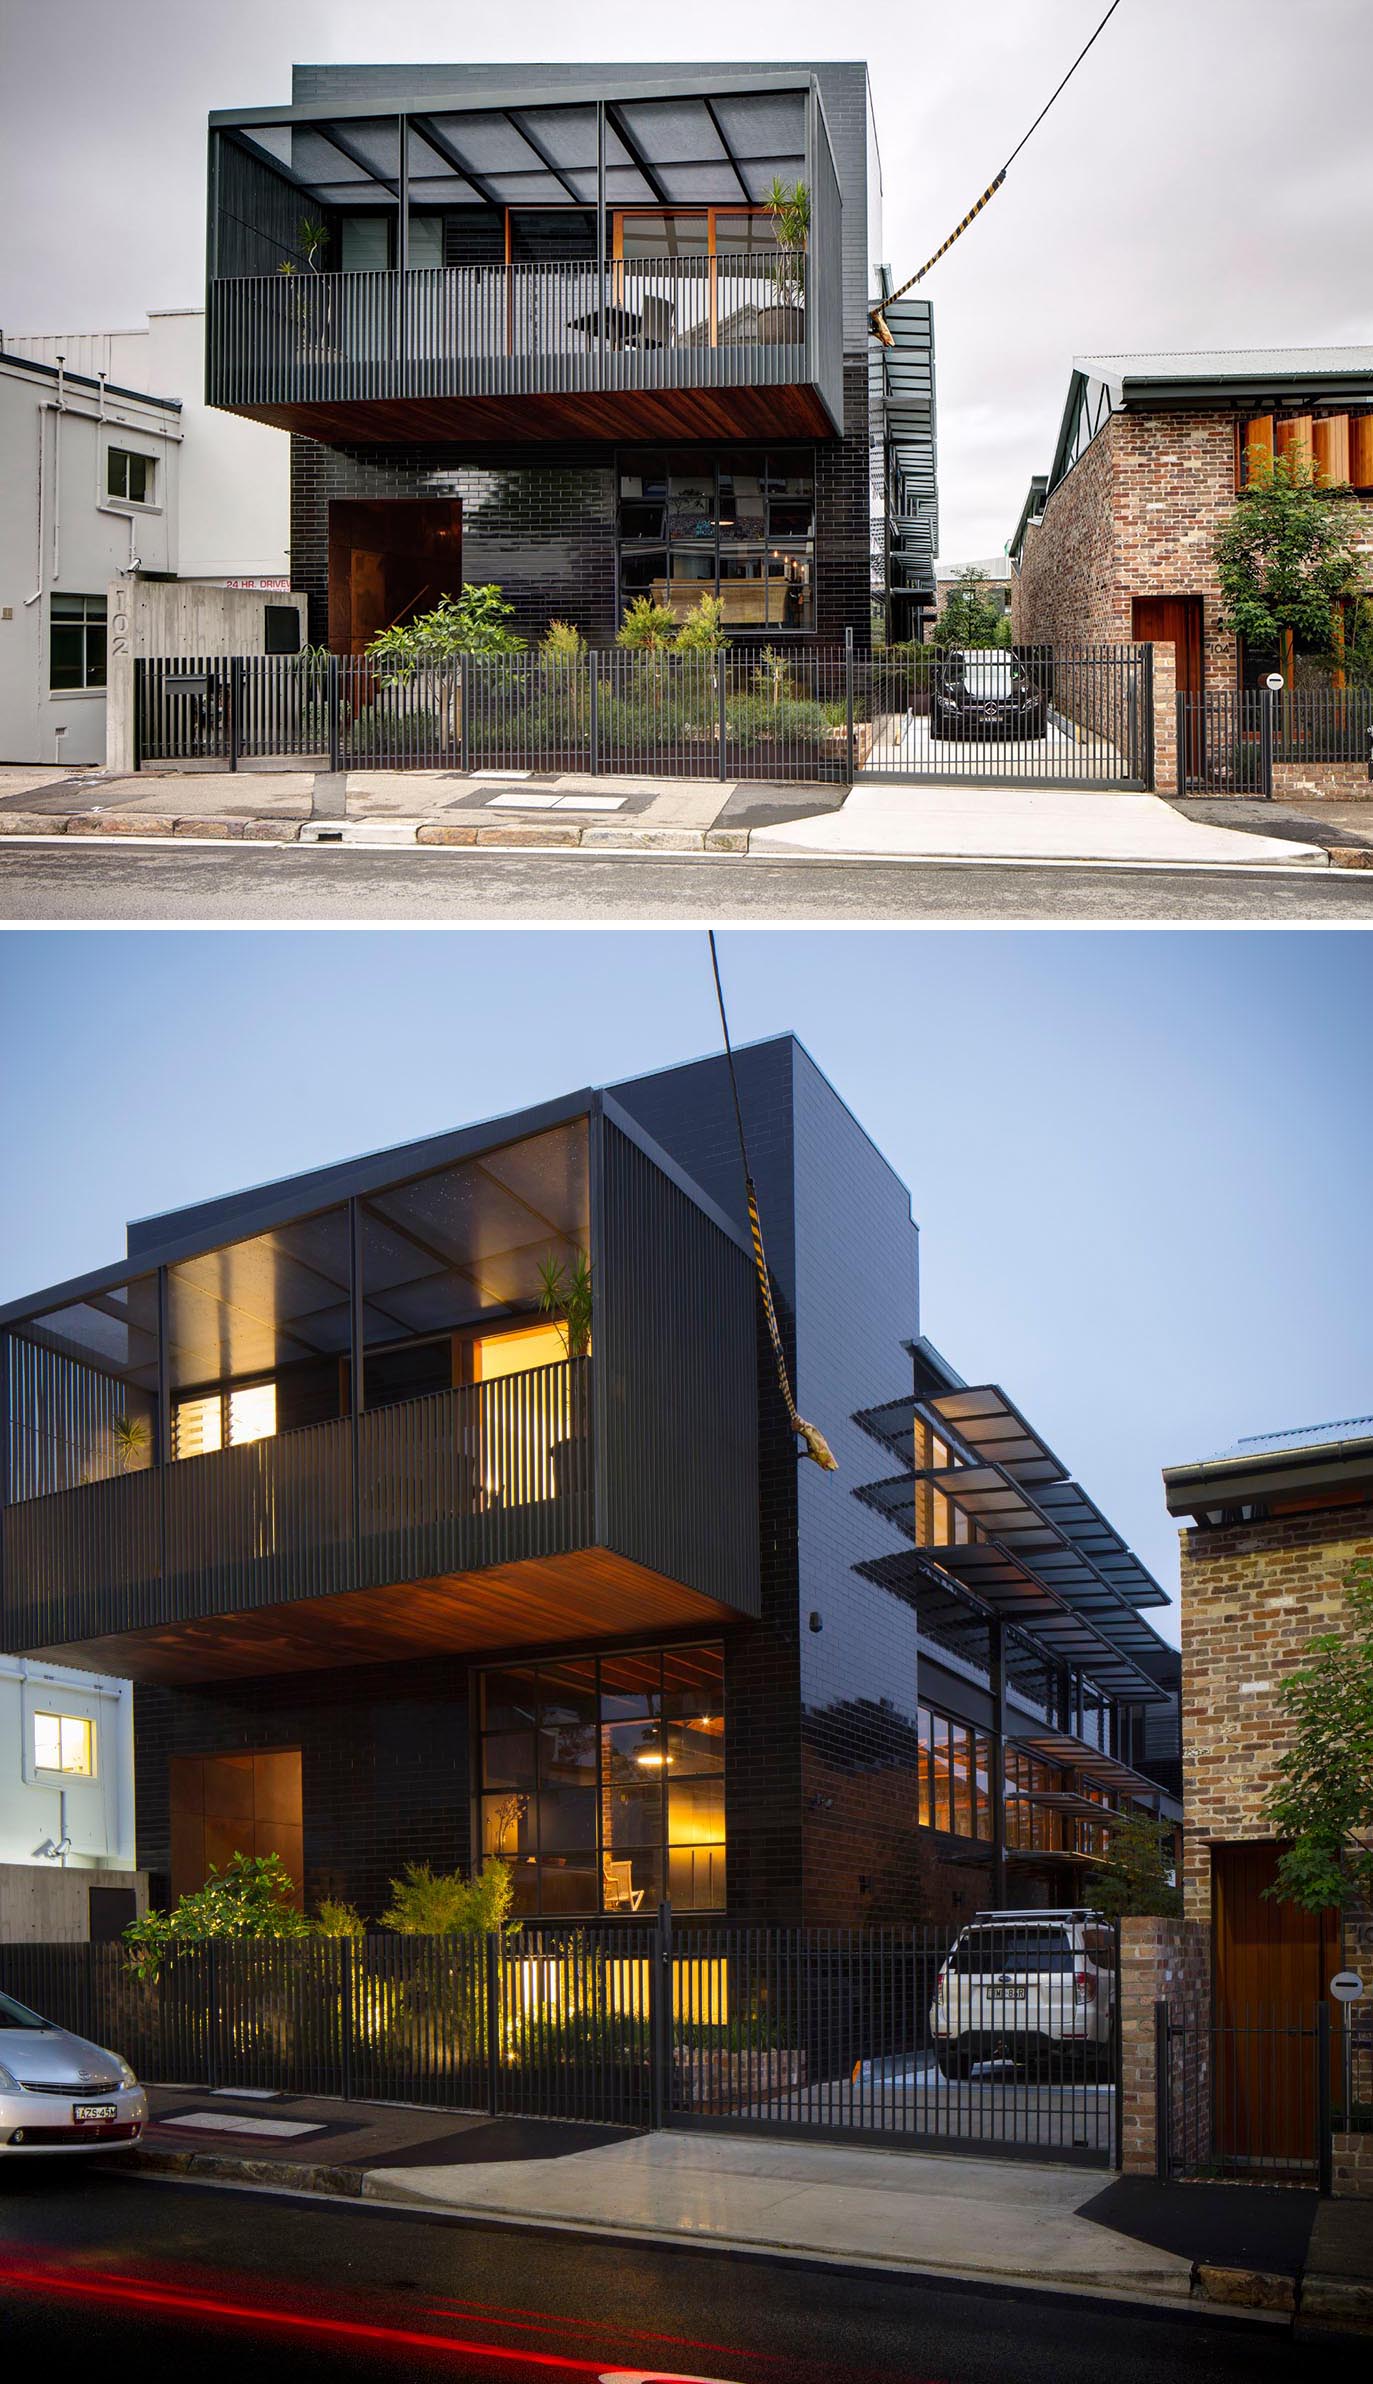 This modern home showcases a facade of glazed black tiles providing a new sophisticated exterior provides a backdrop for the landscaping, which includes a lush urban garden and a small pond.